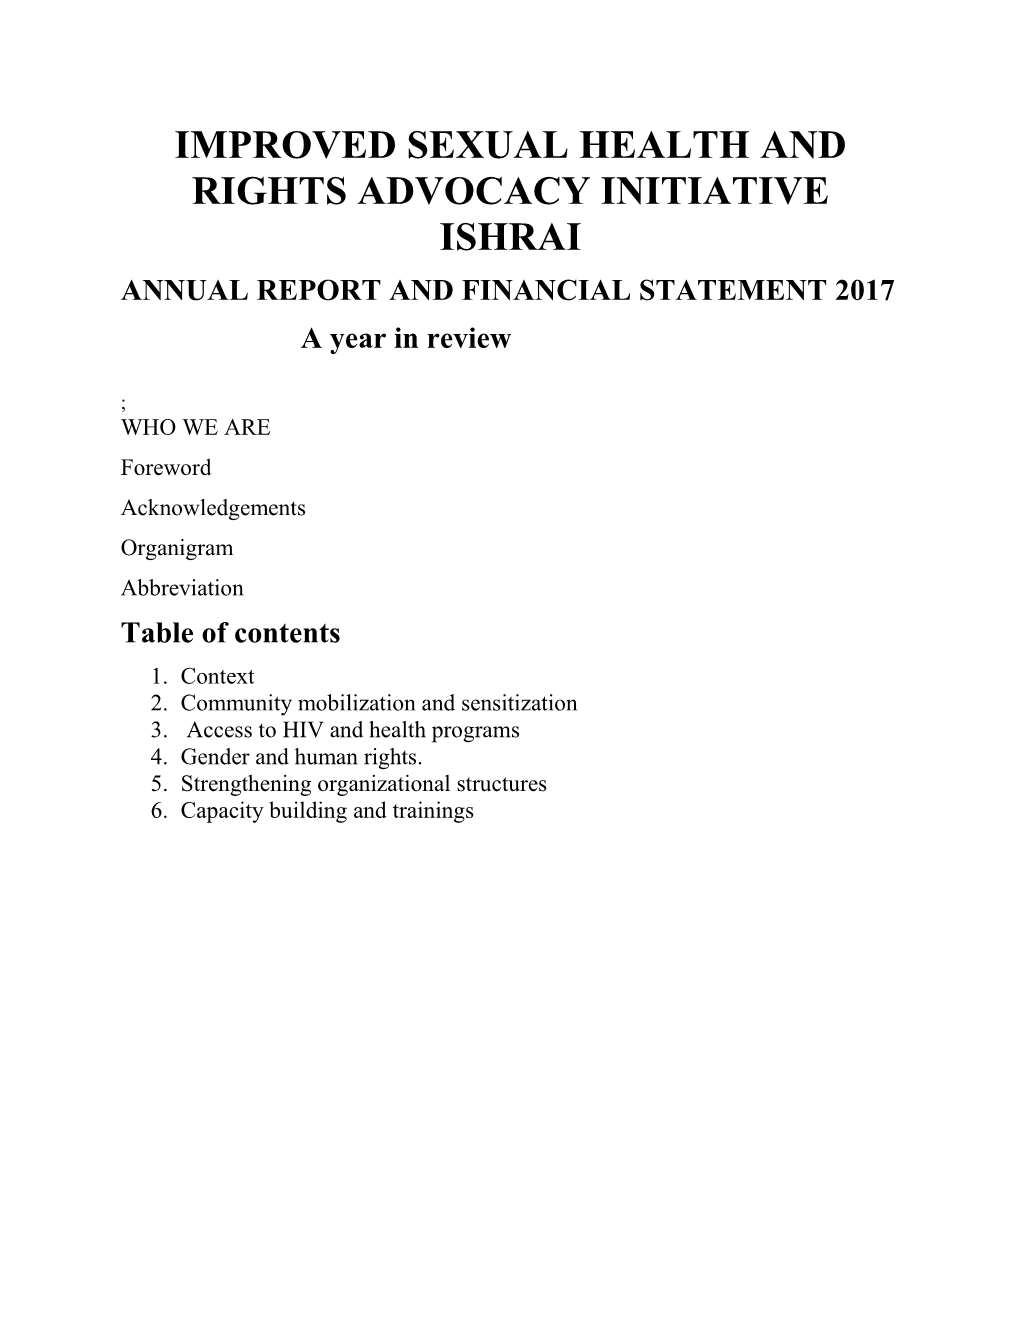 IMPROVED SEXUAL HEALTH and RIGHTS ADVOCACY INITIATIVE ISHRAI ANNUAL REPORT and FINANCIAL STATEMENT 2017 a Year in Review